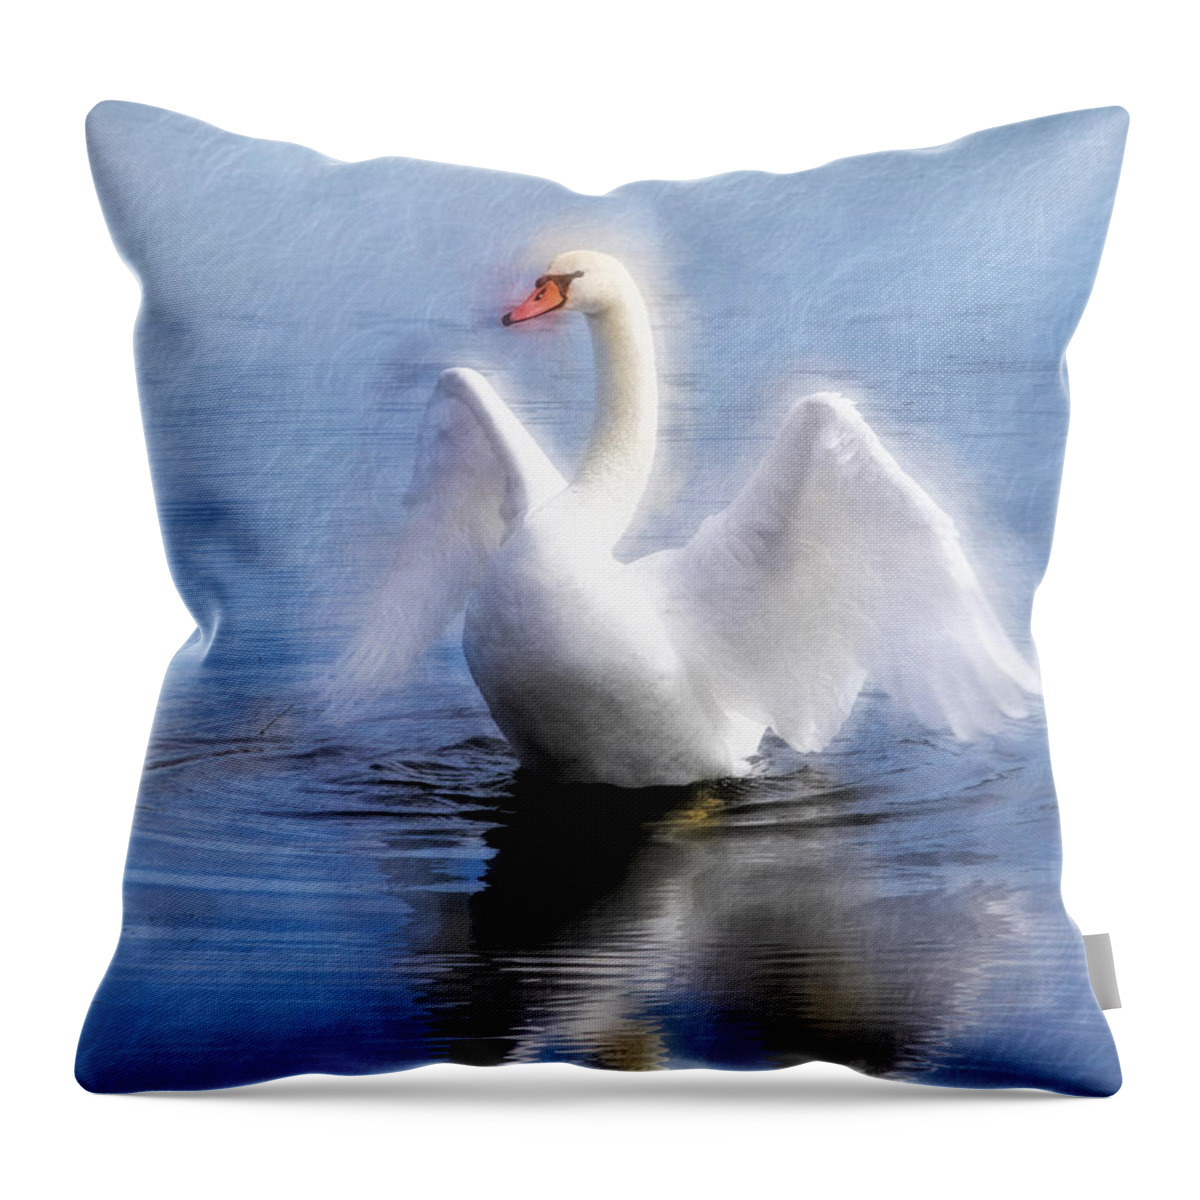 Swan Throw Pillow featuring the photograph Ethereal Swan Wings by Clare VanderVeen